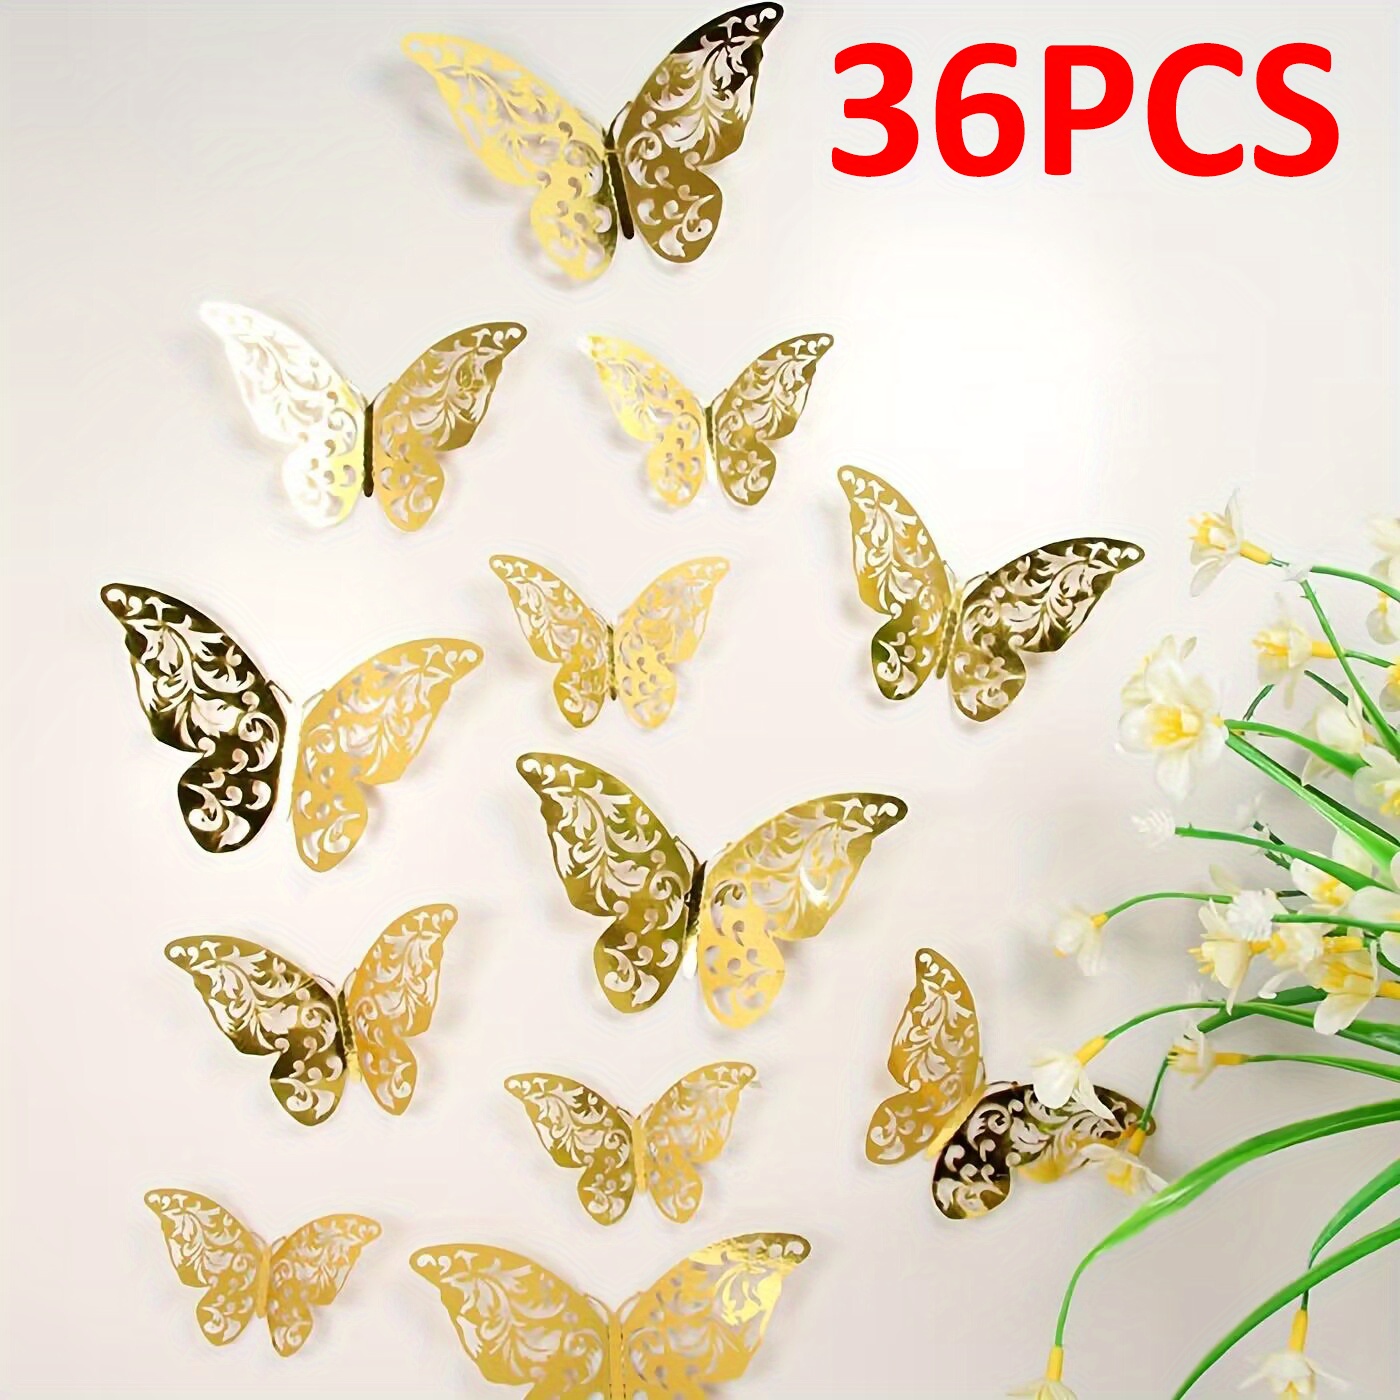 3D Butterfly Stickers DIY Wall Decals Crafts  Decorations for Weddings by